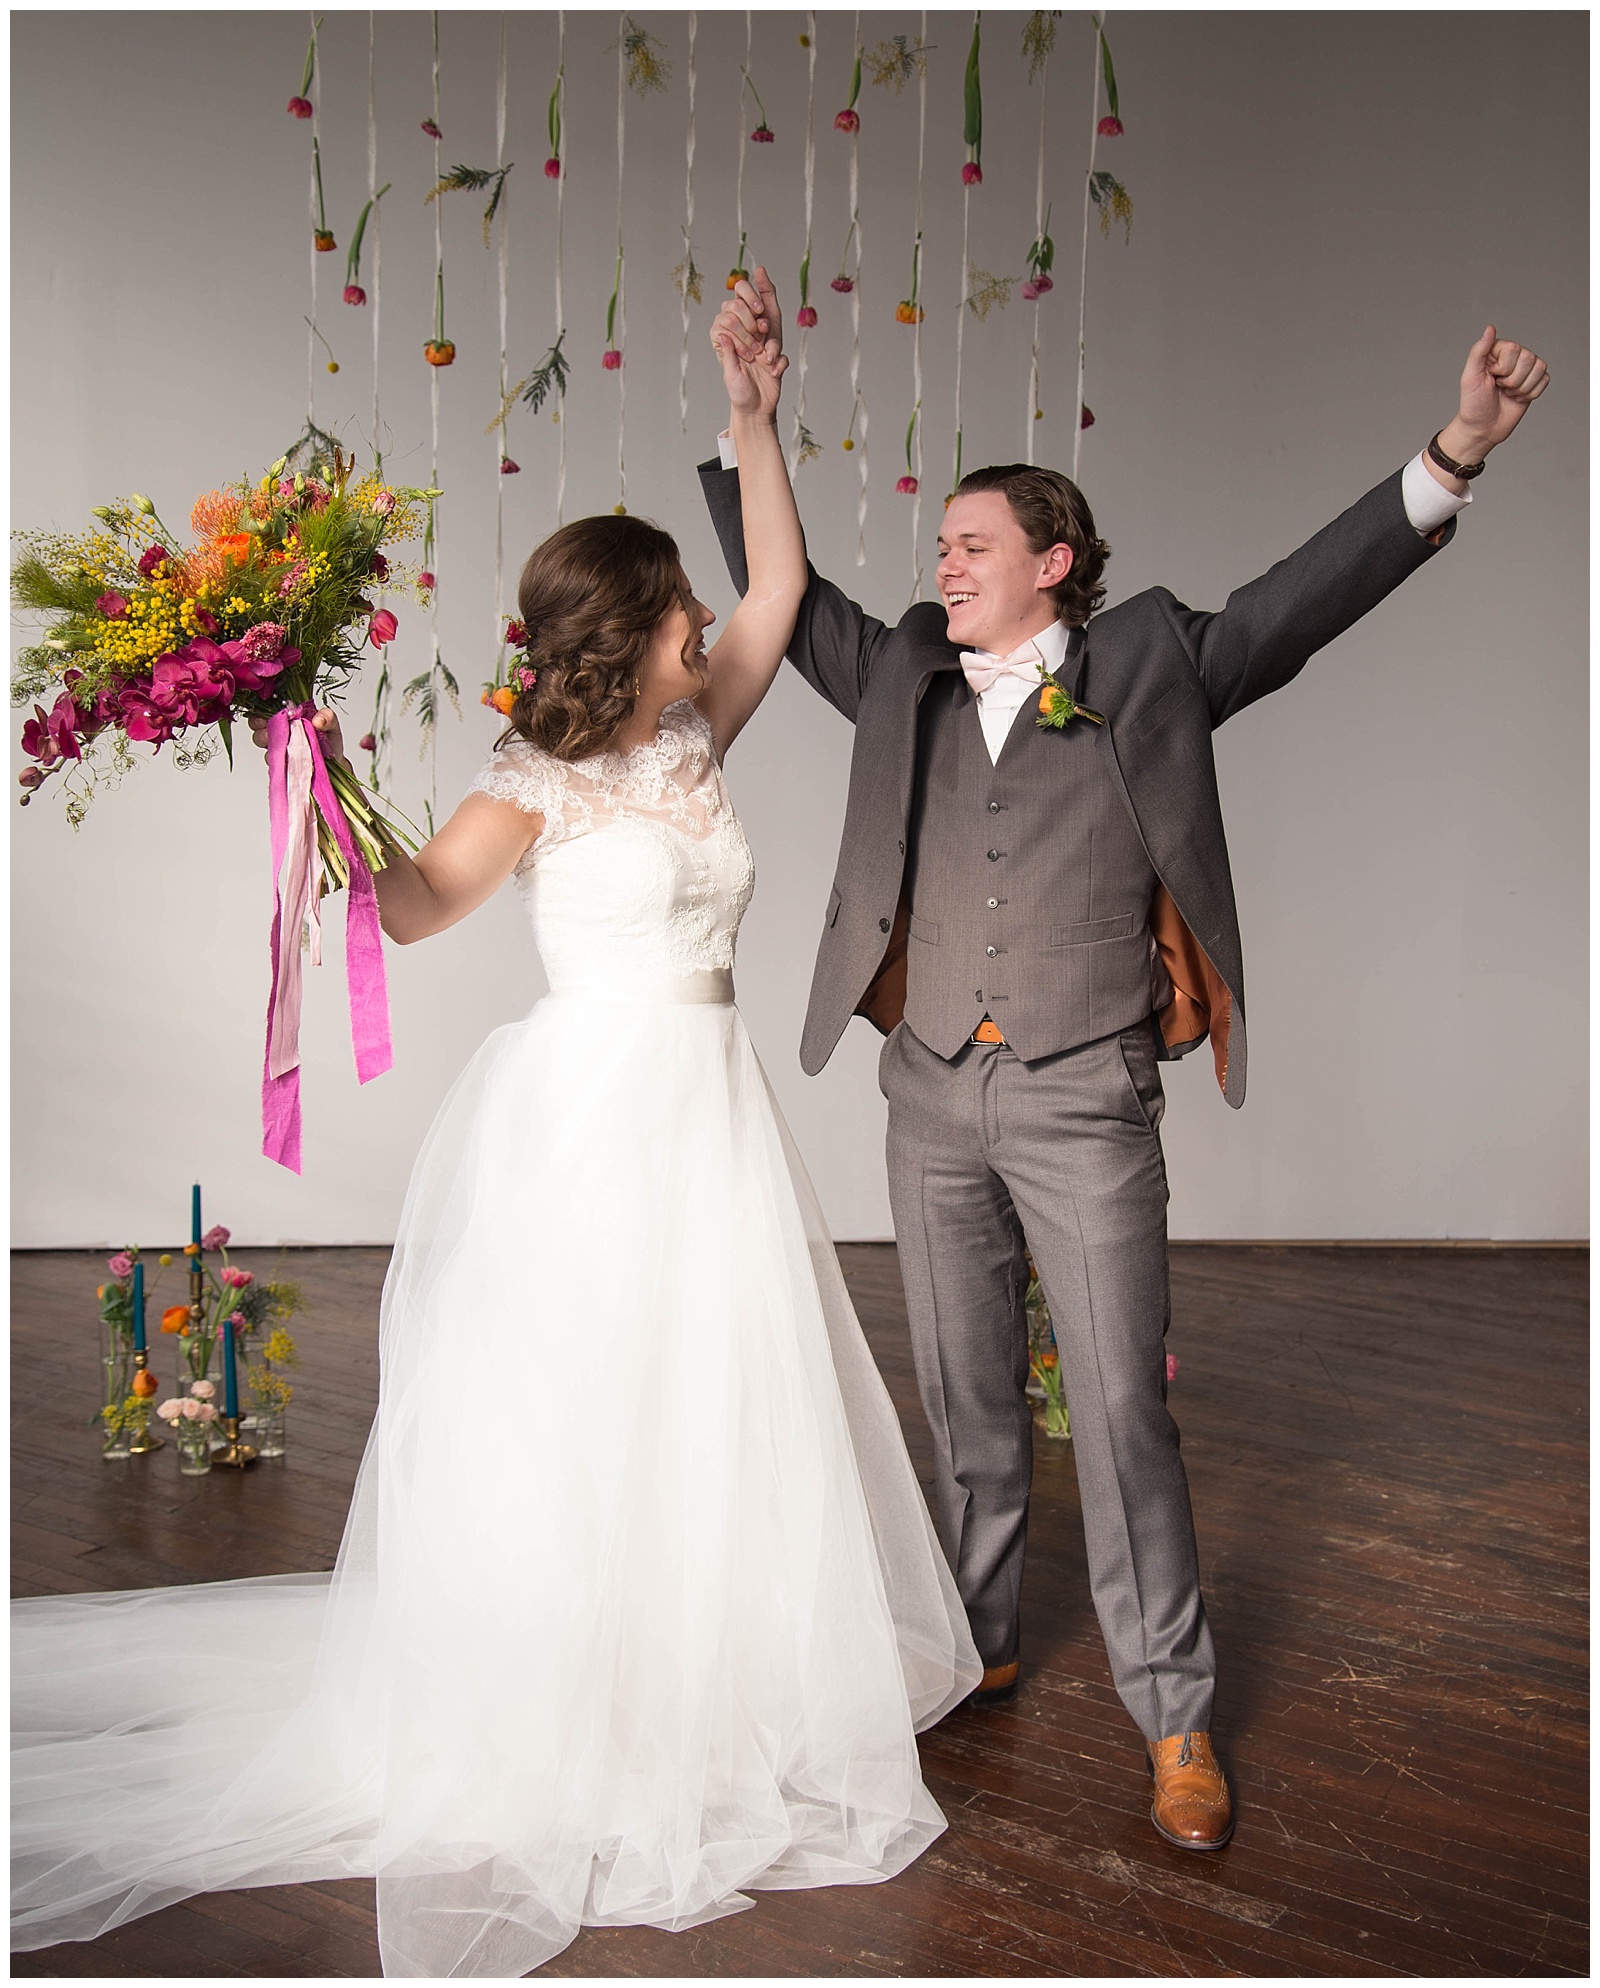 Just Married, Spring Wedding | Monica Brown Photography monicabrownphoto.com